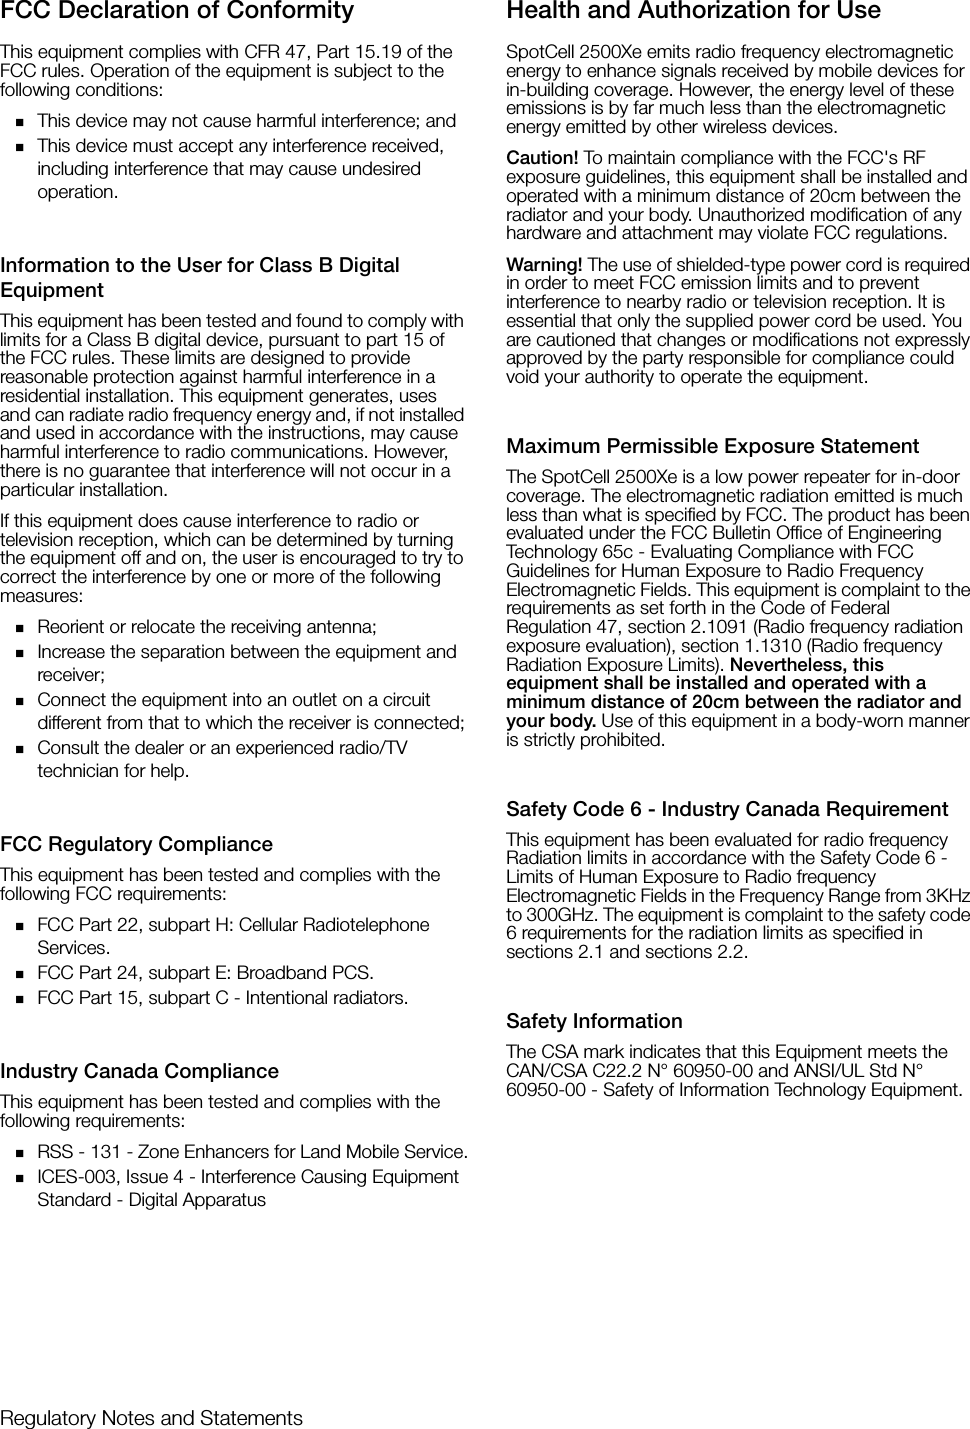 Regulatory Notes and StatementsFCC Declaration of ConformityThis equipment complies with CFR 47, Part 15.19 of the FCC rules. Operation of the equipment is subject to the following conditions:This device may not cause harmful interference; andThis device must accept any interference received, including interference that may cause undesired operation.Information to the User for Class B Digital EquipmentThis equipment has been tested and found to comply with limits for a Class B digital device, pursuant to part 15 of the FCC rules. These limits are designed to provide reasonable protection against harmful interference in a residential installation. This equipment generates, uses and can radiate radio frequency energy and, if not installed and used in accordance with the instructions, may cause harmful interference to radio communications. However, there is no guarantee that interference will not occur in a particular installation.If this equipment does cause interference to radio or television reception, which can be determined by turning the equipment off and on, the user is encouraged to try to correct the interference by one or more of the following measures:Reorient or relocate the receiving antenna;Increase the separation between the equipment and receiver;Connect the equipment into an outlet on a circuit different from that to which the receiver is connected;Consult the dealer or an experienced radio/TV technician for help. FCC Regulatory ComplianceThis equipment has been tested and complies with the following FCC requirements:FCC Part 22, subpart H: Cellular Radiotelephone Services.FCC Part 24, subpart E: Broadband PCS.FCC Part 15, subpart C - Intentional radiators.Industry Canada ComplianceThis equipment has been tested and complies with the following requirements:RSS - 131 - Zone Enhancers for Land Mobile Service.ICES-003, Issue 4 - Interference Causing Equipment Standard - Digital ApparatusHealth and Authorization for UseSpotCell 2500Xe emits radio frequency electromagnetic energy to enhance signals received by mobile devices for in-building coverage. However, the energy level of these emissions is by far much less than the electromagnetic energy emitted by other wireless devices. Caution! To maintain compliance with the FCC&apos;s RF exposure guidelines, this equipment shall be installed and operated with a minimum distance of 20cm between the radiator and your body. Unauthorized modification of any hardware and attachment may violate FCC regulations.Warning! The use of shielded-type power cord is required in order to meet FCC emission limits and to prevent interference to nearby radio or television reception. It is essential that only the supplied power cord be used. You are cautioned that changes or modifications not expressly approved by the party responsible for compliance could void your authority to operate the equipment.Maximum Permissible Exposure StatementThe SpotCell 2500Xe is a low power repeater for in-door coverage. The electromagnetic radiation emitted is much less than what is specified by FCC. The product has been evaluated under the FCC Bulletin Office of Engineering Technology 65c - Evaluating Compliance with FCC Guidelines for Human Exposure to Radio Frequency Electromagnetic Fields. This equipment is complaint to the requirements as set forth in the Code of Federal Regulation 47, section 2.1091 (Radio frequency radiation exposure evaluation), section 1.1310 (Radio frequency Radiation Exposure Limits). Nevertheless, this equipment shall be installed and operated with a minimum distance of 20cm between the radiator and your body. Use of this equipment in a body-worn manner is strictly prohibited.Safety Code 6 - Industry Canada RequirementThis equipment has been evaluated for radio frequency Radiation limits in accordance with the Safety Code 6 - Limits of Human Exposure to Radio frequency Electromagnetic Fields in the Frequency Range from 3KHz to 300GHz. The equipment is complaint to the safety code 6 requirements for the radiation limits as specified in sections 2.1 and sections 2.2.Safety InformationThe CSA mark indicates that this Equipment meets the CAN/CSA C22.2 N° 60950-00 and ANSI/UL Std N° 60950-00 - Safety of Information Technology Equipment. 